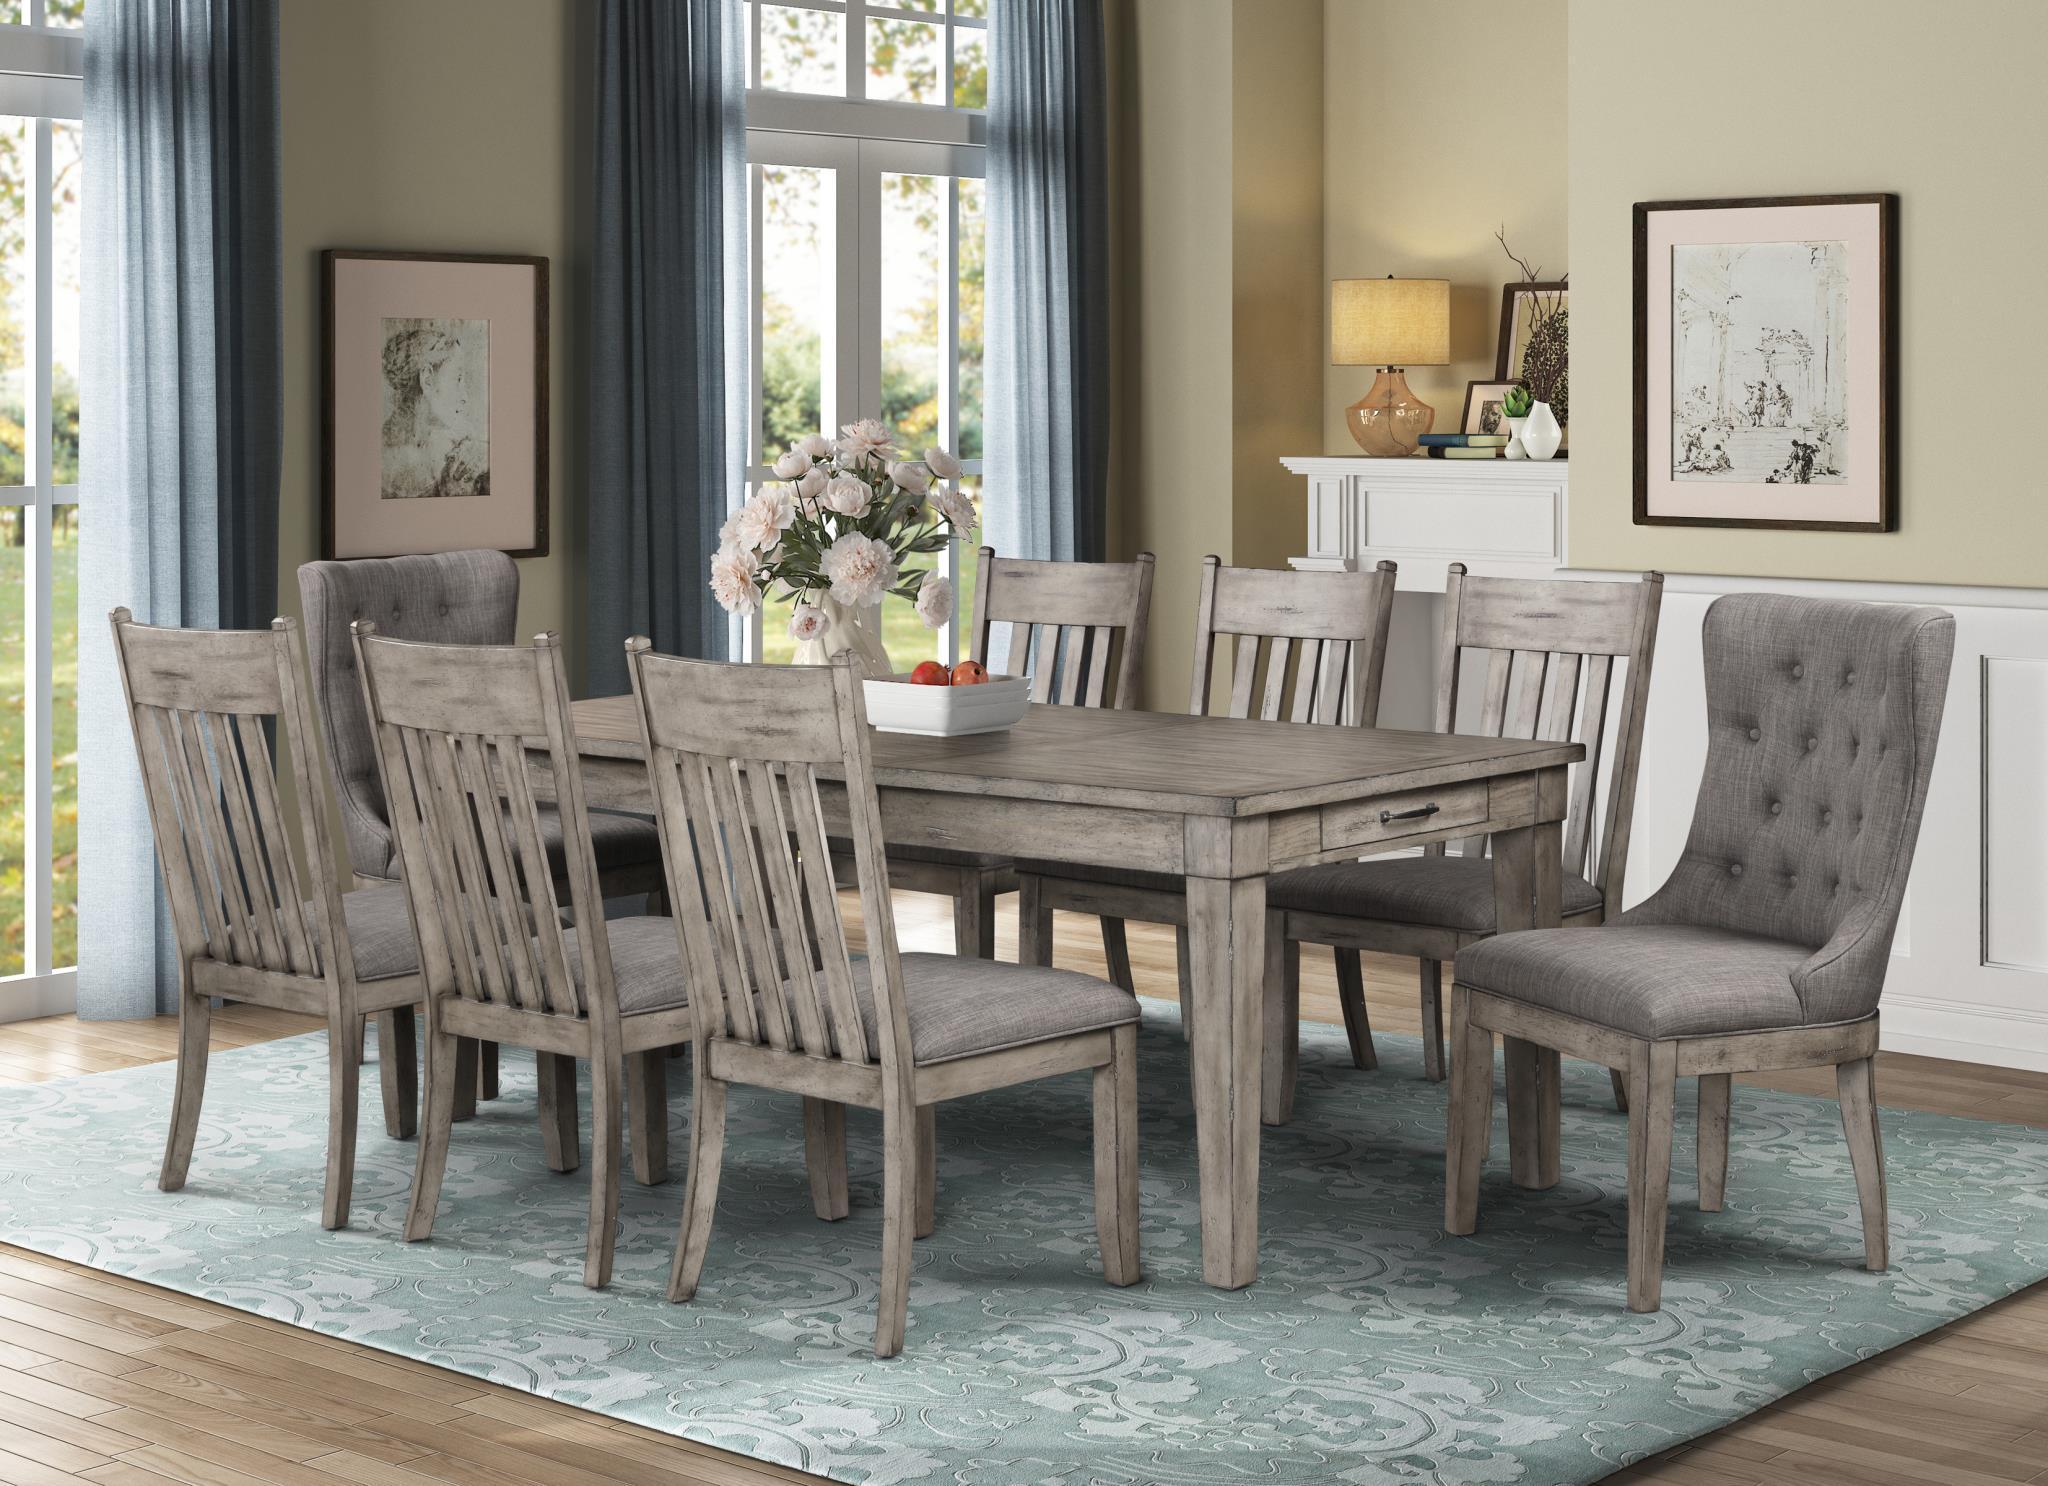 Rustic, Cottage, Farmhouse Dining Room Set Rustic Casual 1 1284-500-7pcs in Brown 